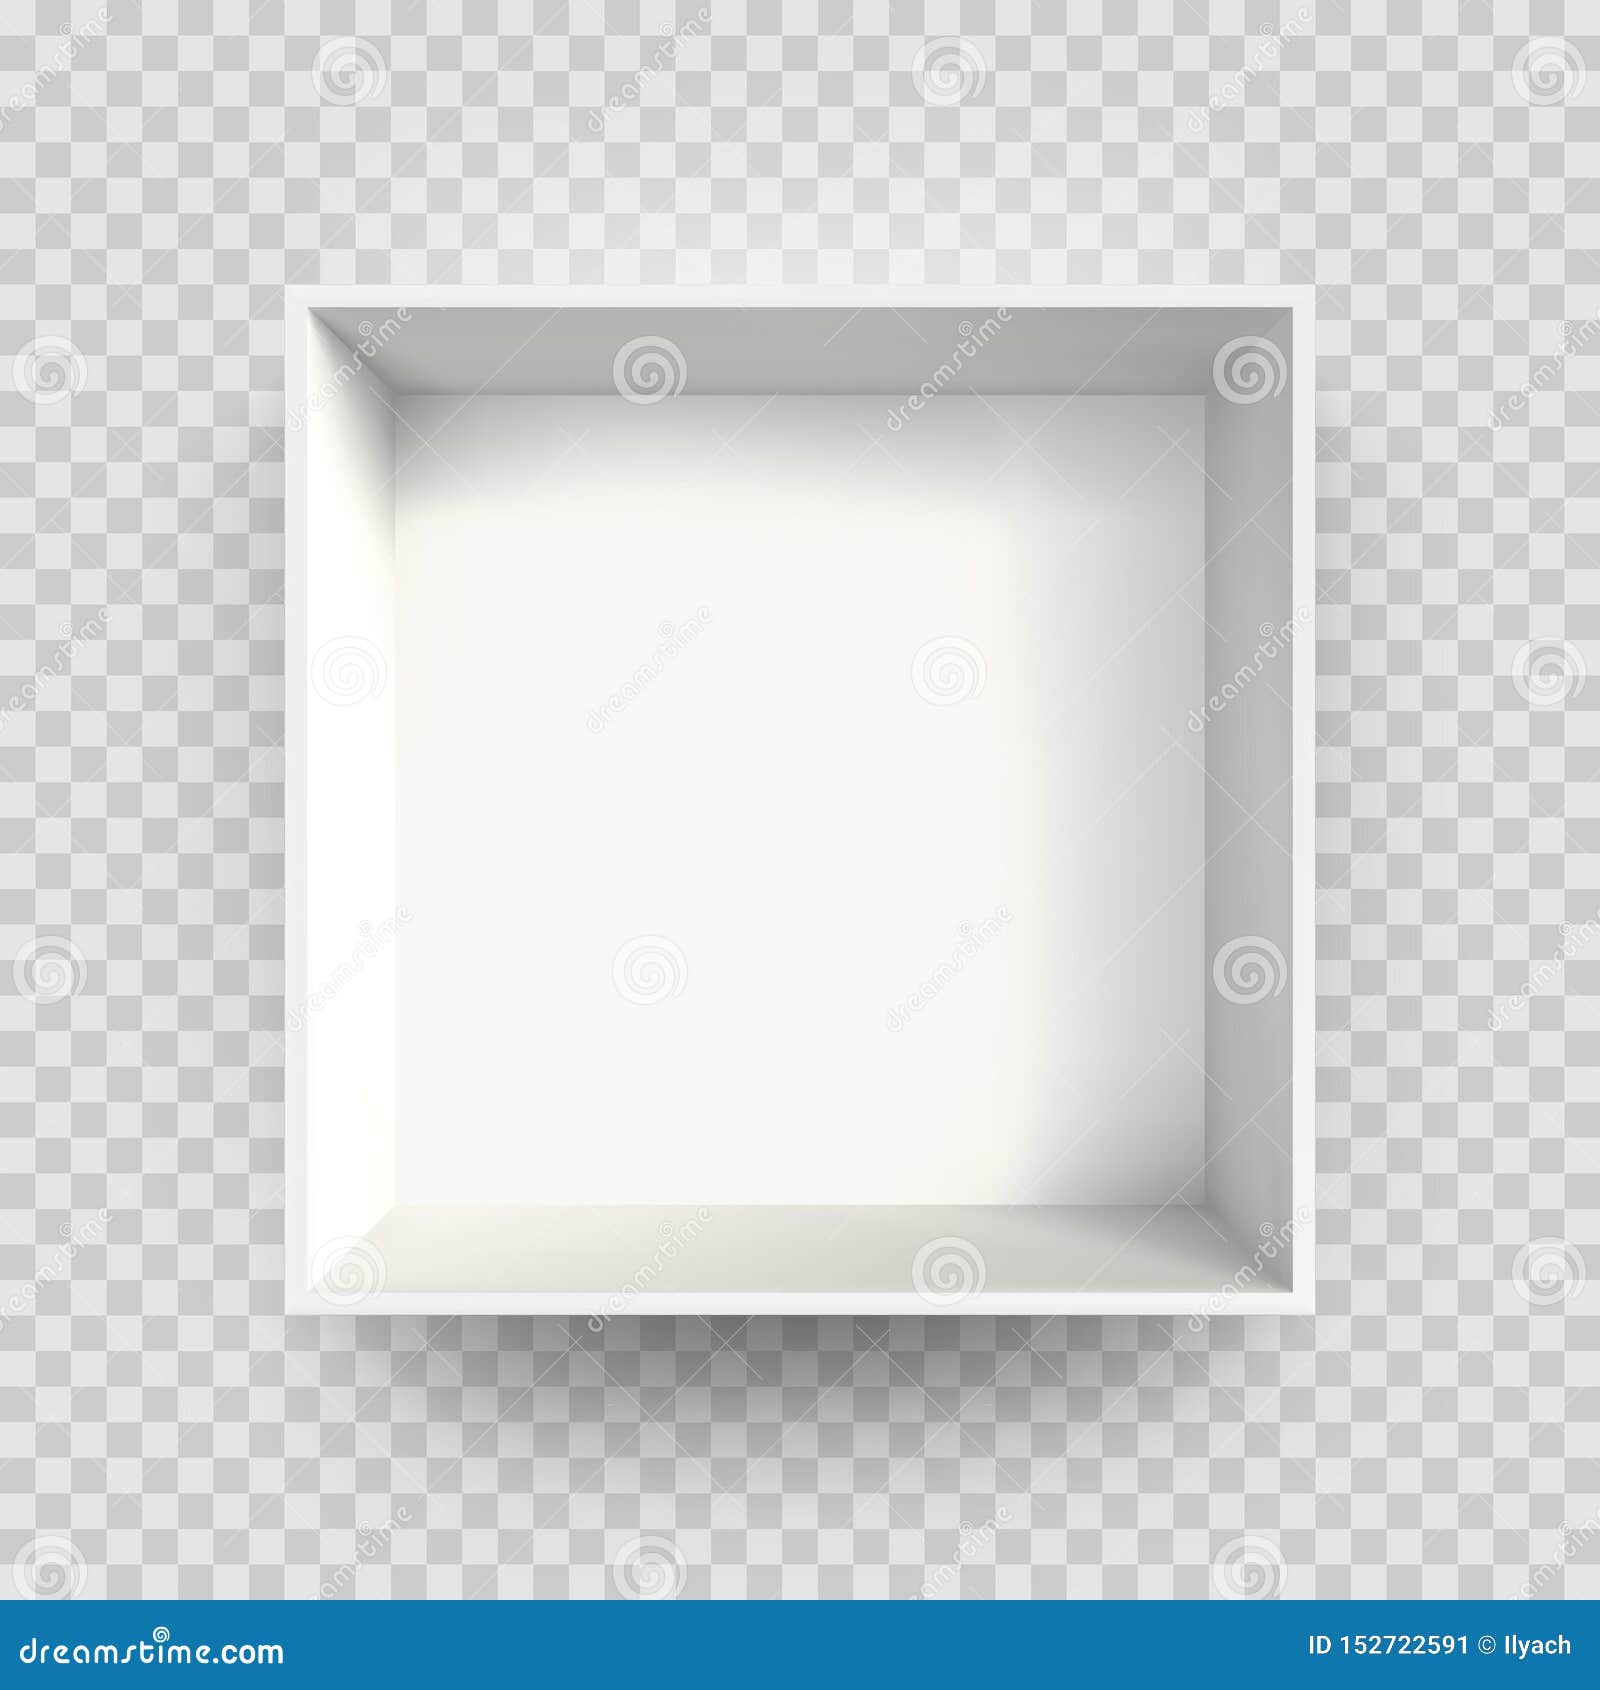 Download White Box Mock Up 3D Model 3D Top View Shadow. Vector ...